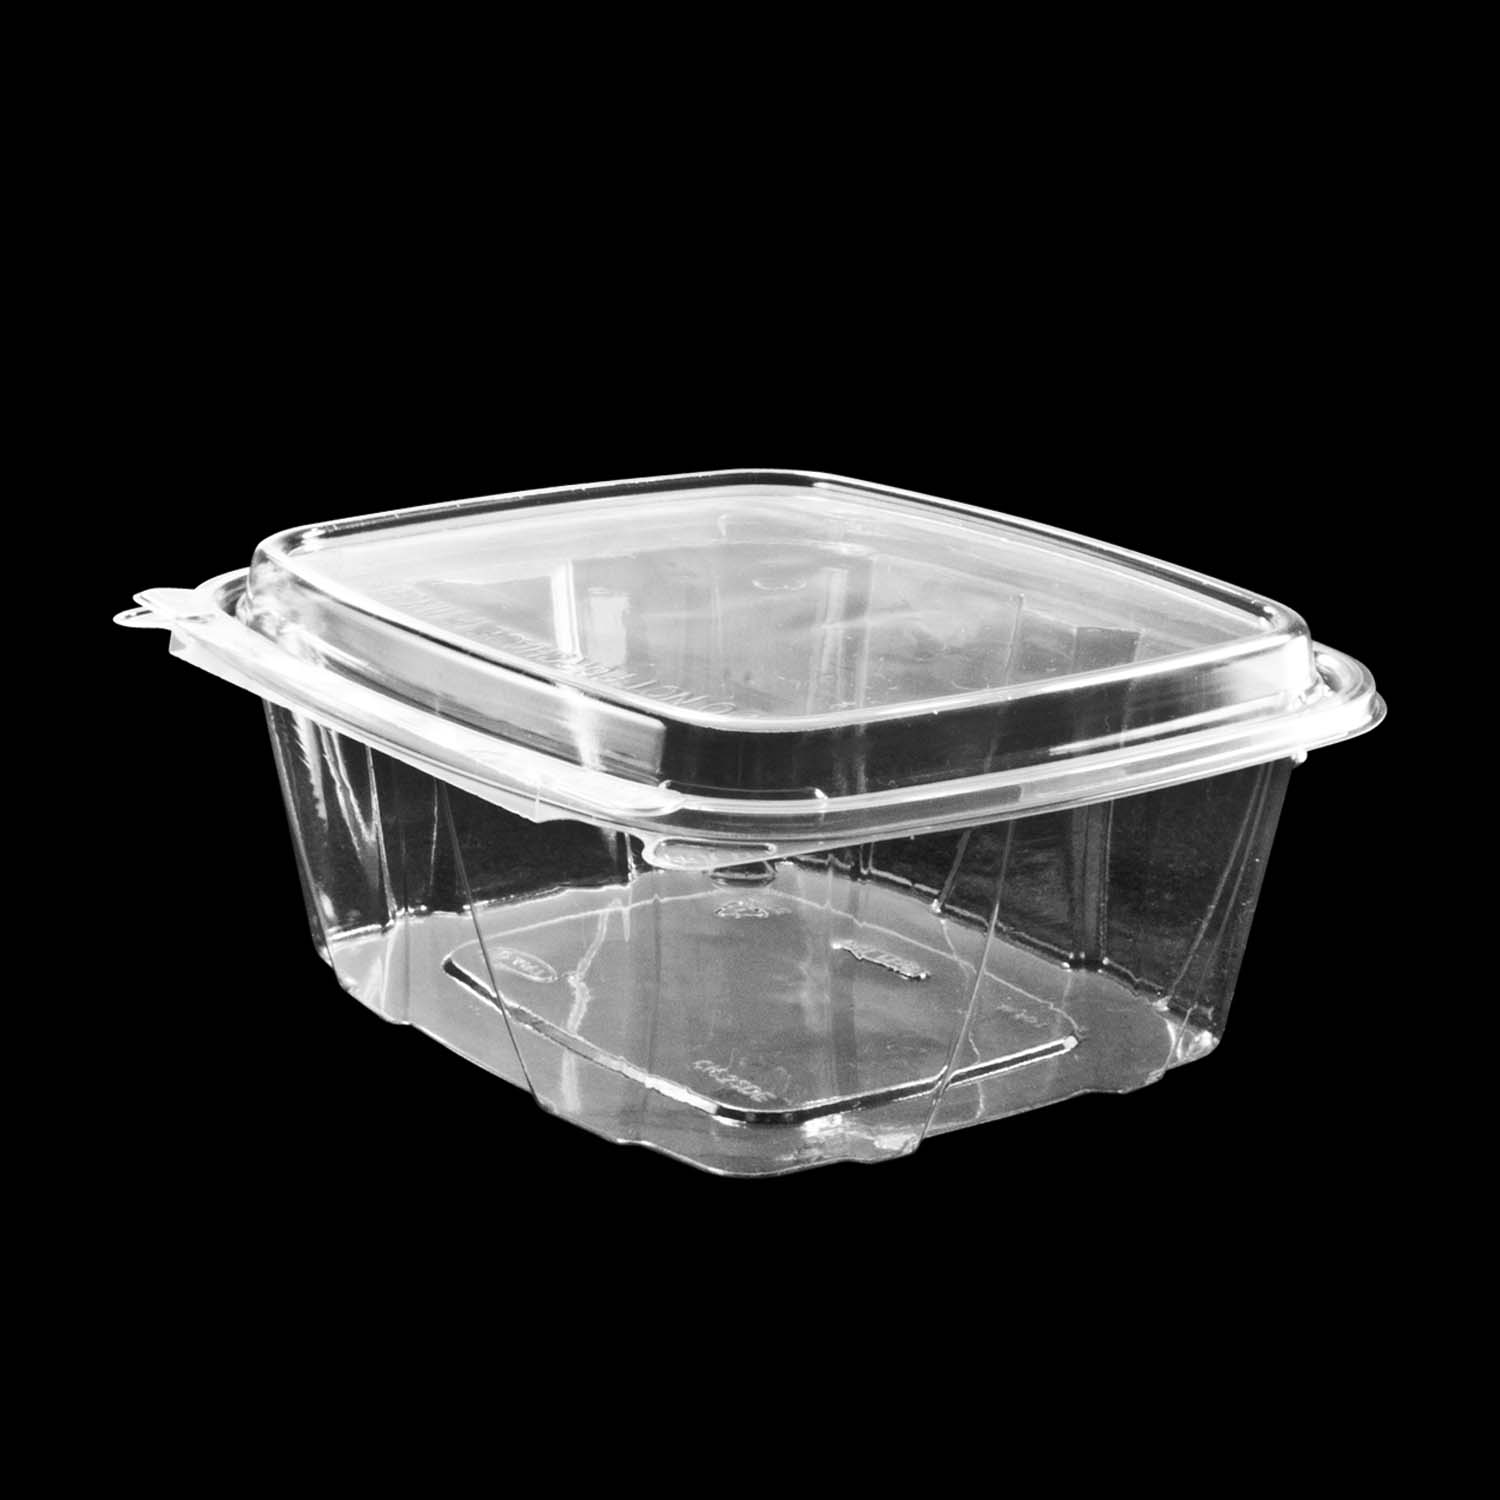 32OZ SAFESEAL CONTAINER DOME
LID 200